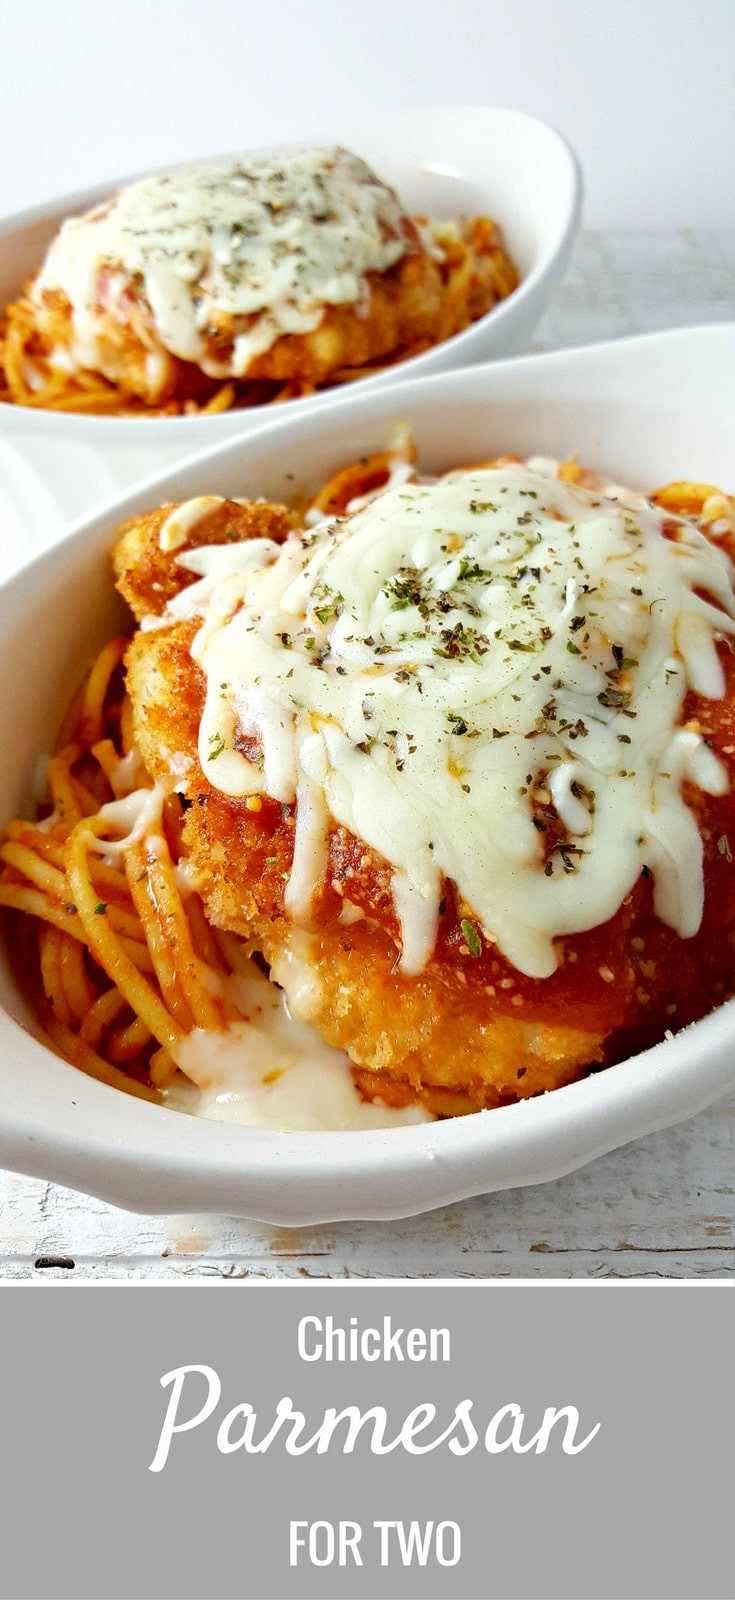 Easy Chicken Dinner Recipes For Two
 Easy Chicken Parmesan Recipe Romantic Dinner for Two